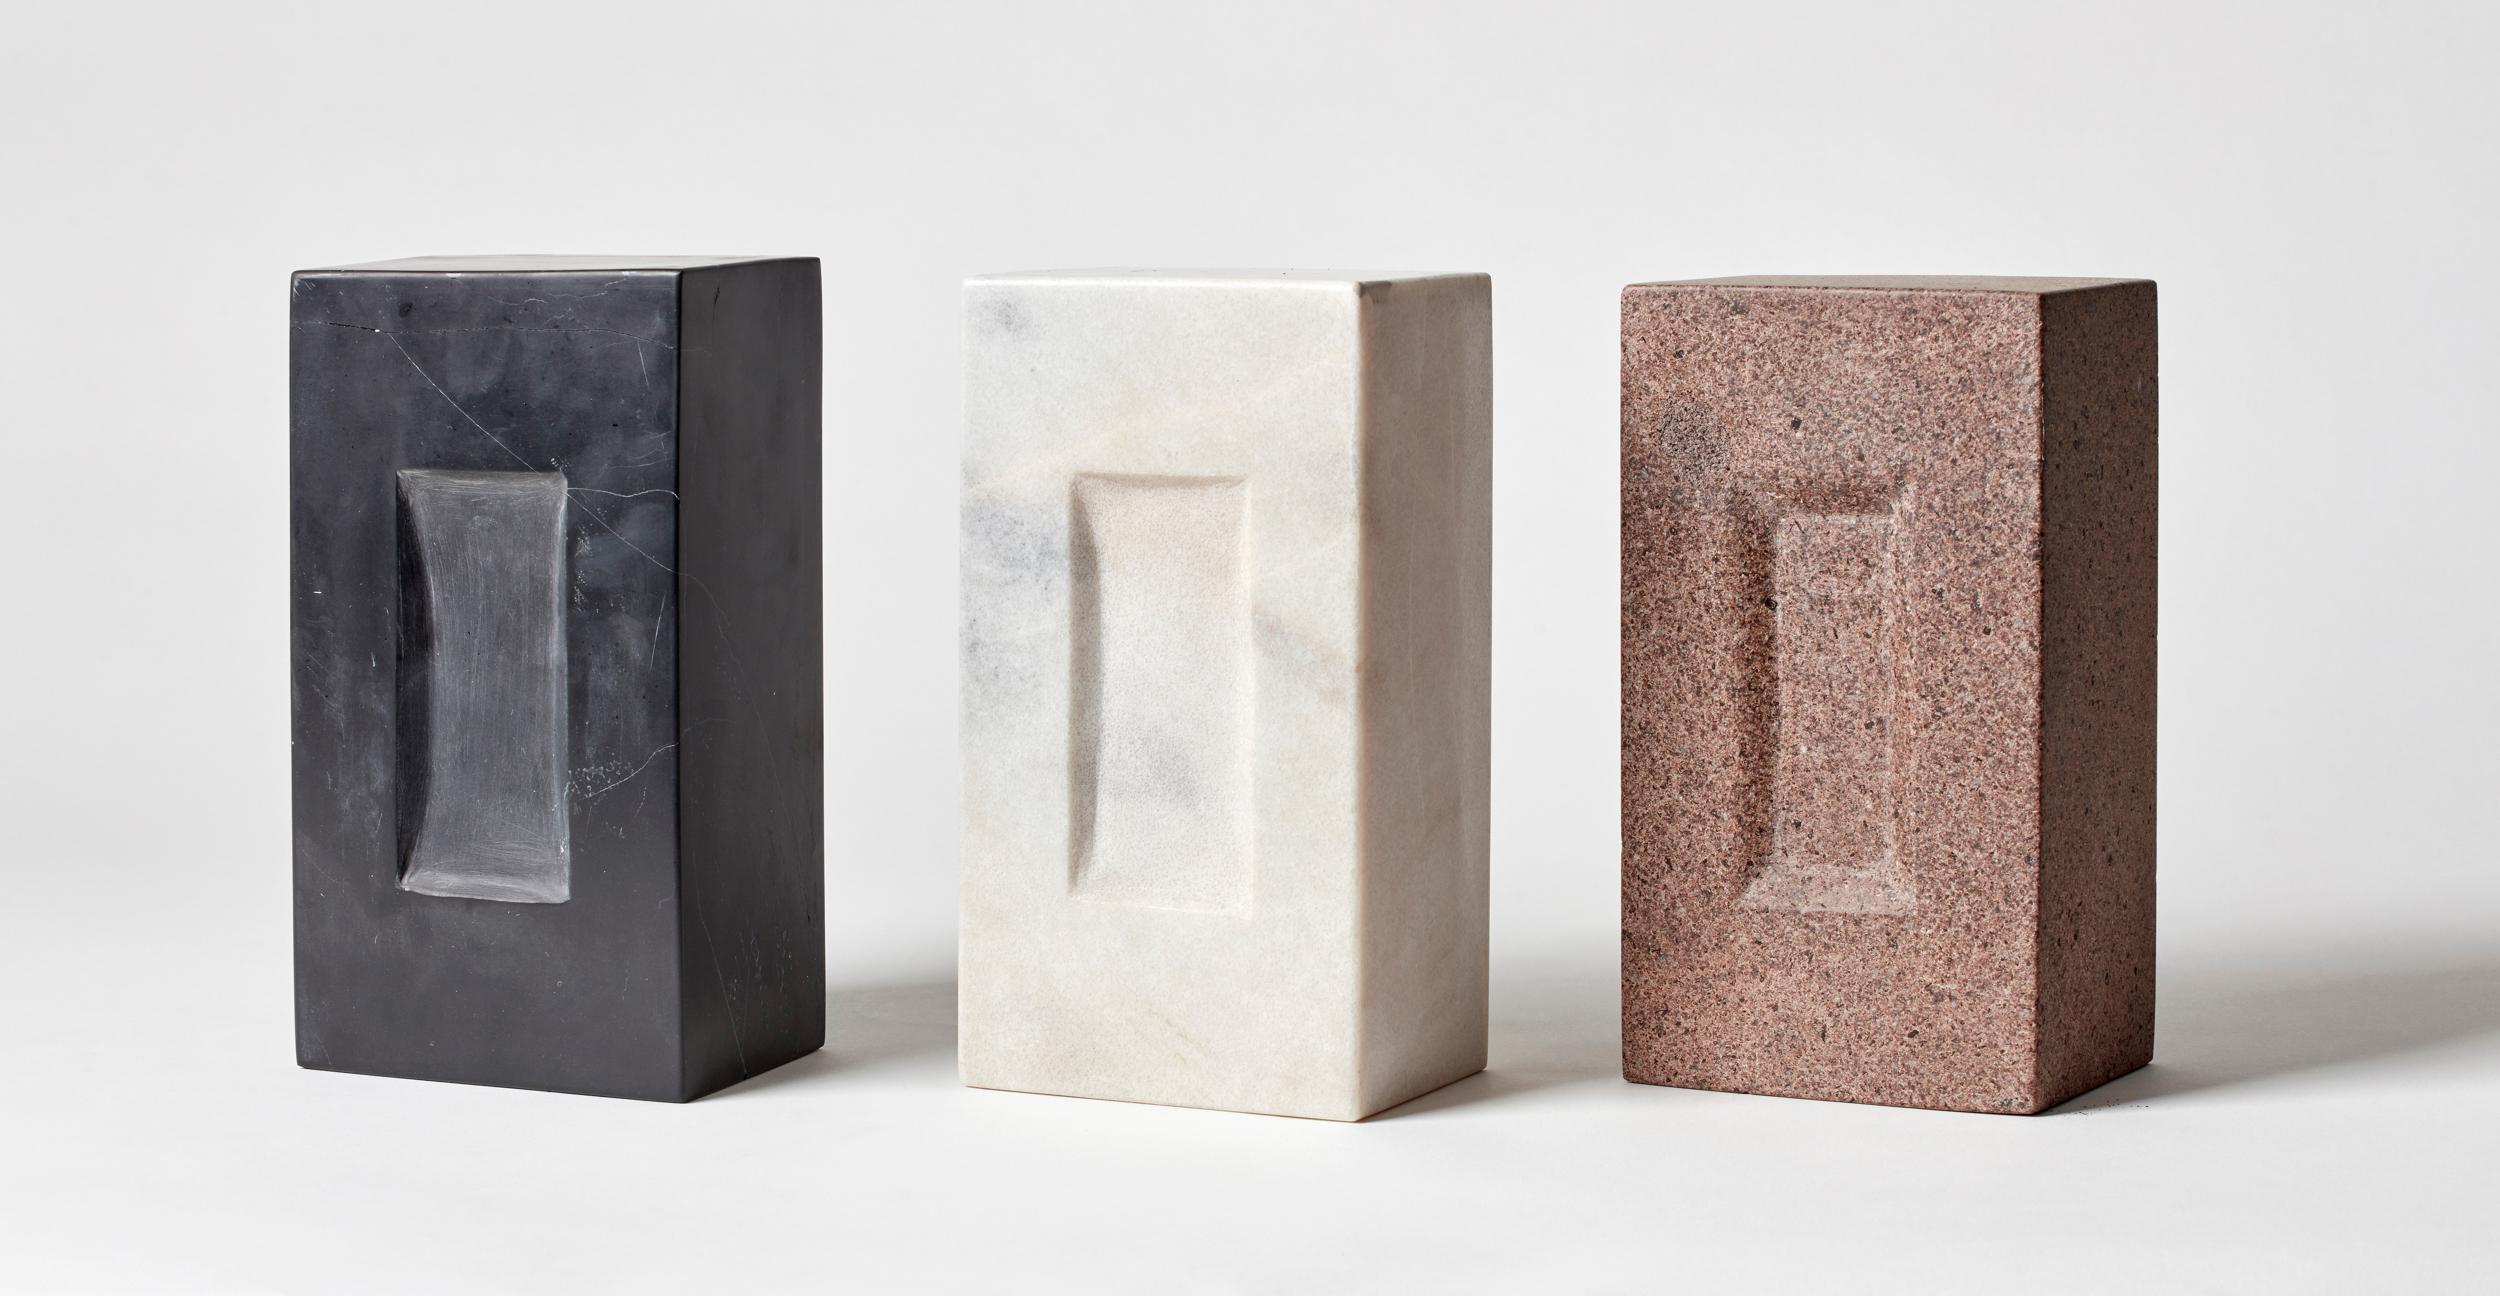 Set of 3 Bricks by Estudio Rafael Freyre
Dimensions: W 12.5 D 9 x H 23 cm 
Materials: Andes Stones
Also Available: Other finishes available.

The brick is a generic constructive element that constitutes part of the urban imaginary. In Peru,